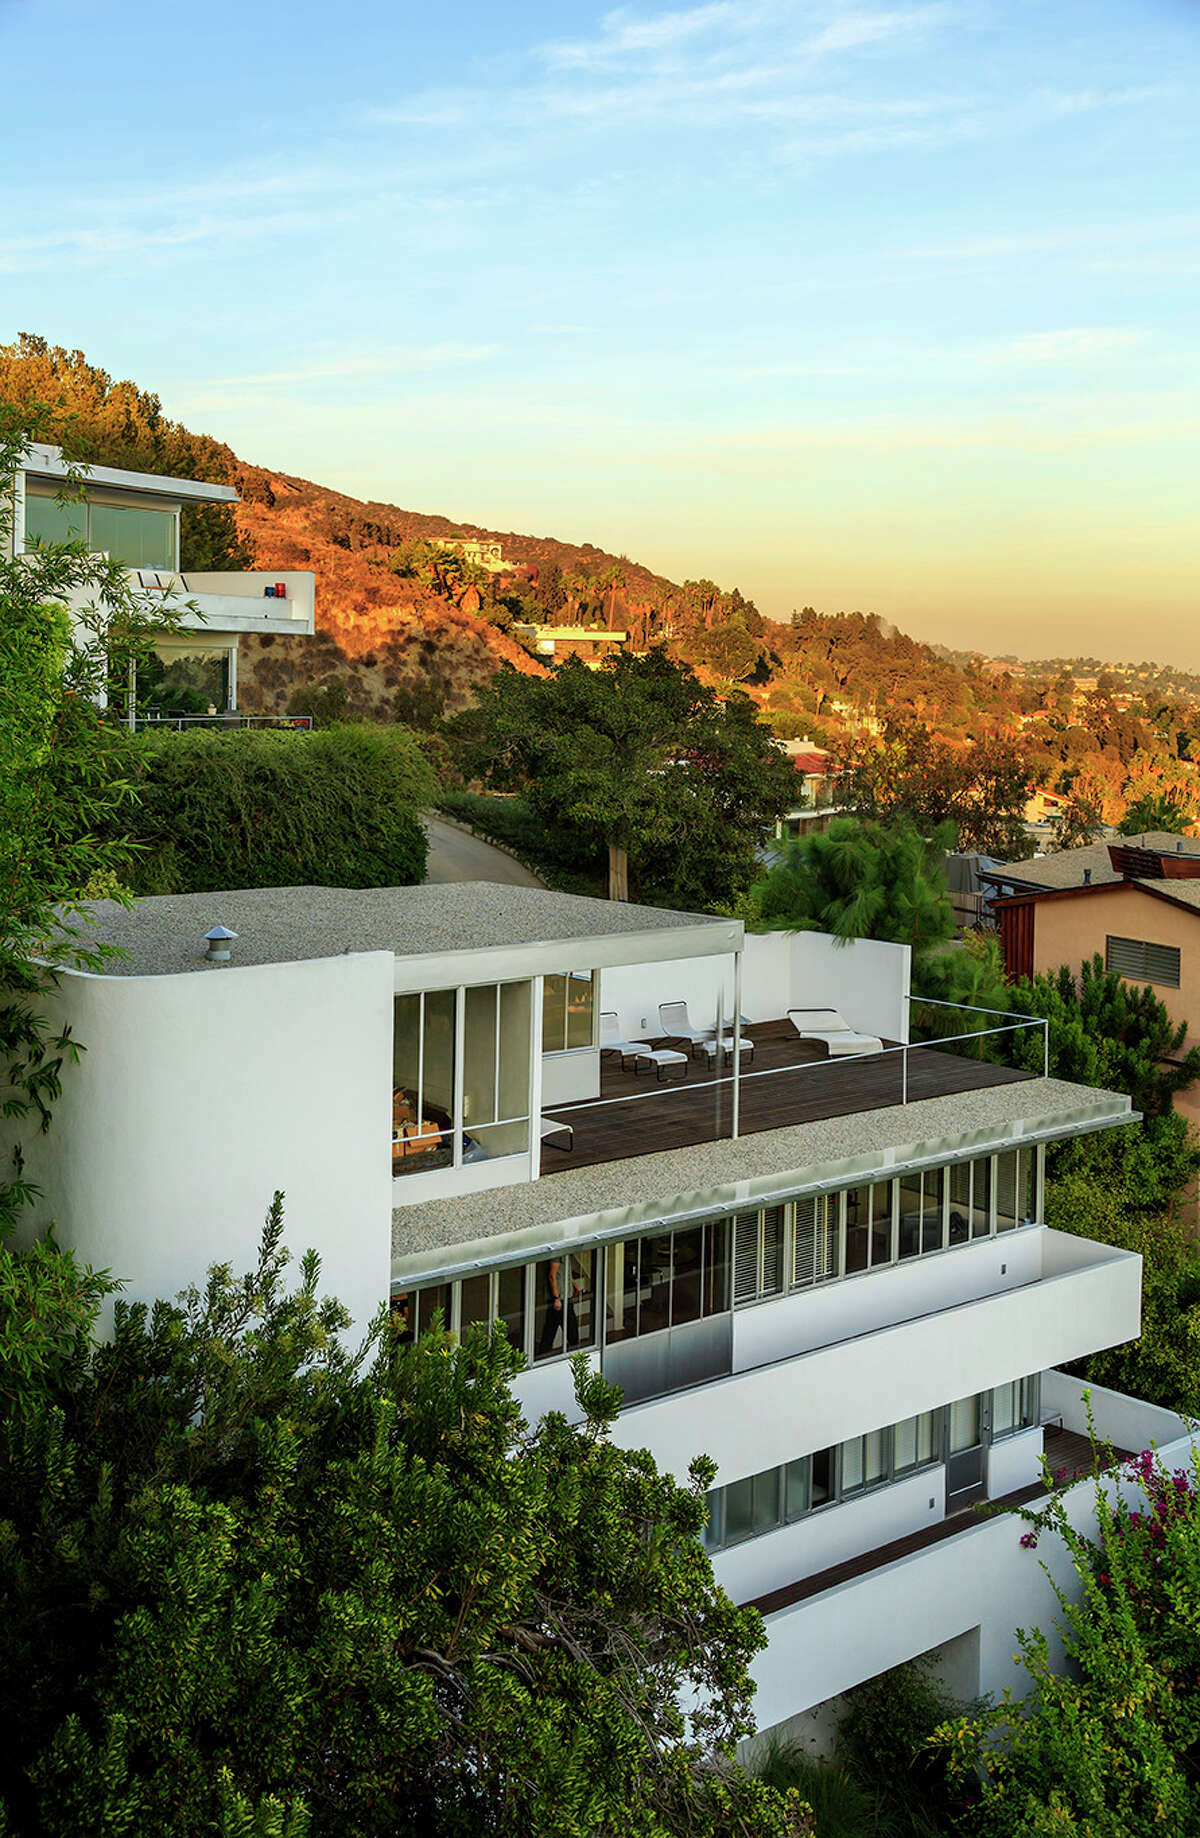 A Richard Neutra house in the Hollywood hills, like many Neutras, has been restored back to the way it was when built. 